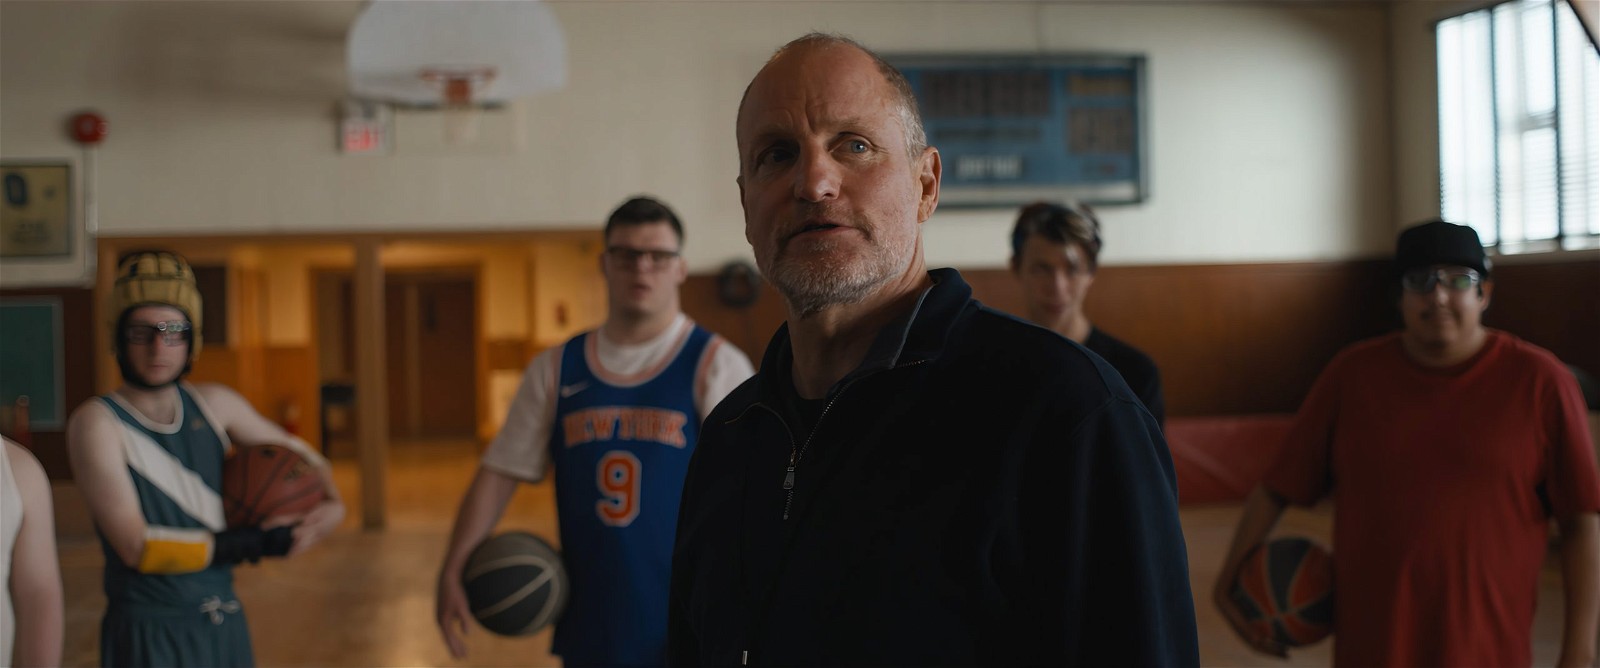 (L to R) Casey Metcalfe as Marlon, James Day Keith as Benny, Woody Harrelson as Marcus, Ashton Gunning as Cody, and Tom Sinclair as Blair in director Bobby Farrelly’s CHAMPIONS, a Focus Features release.